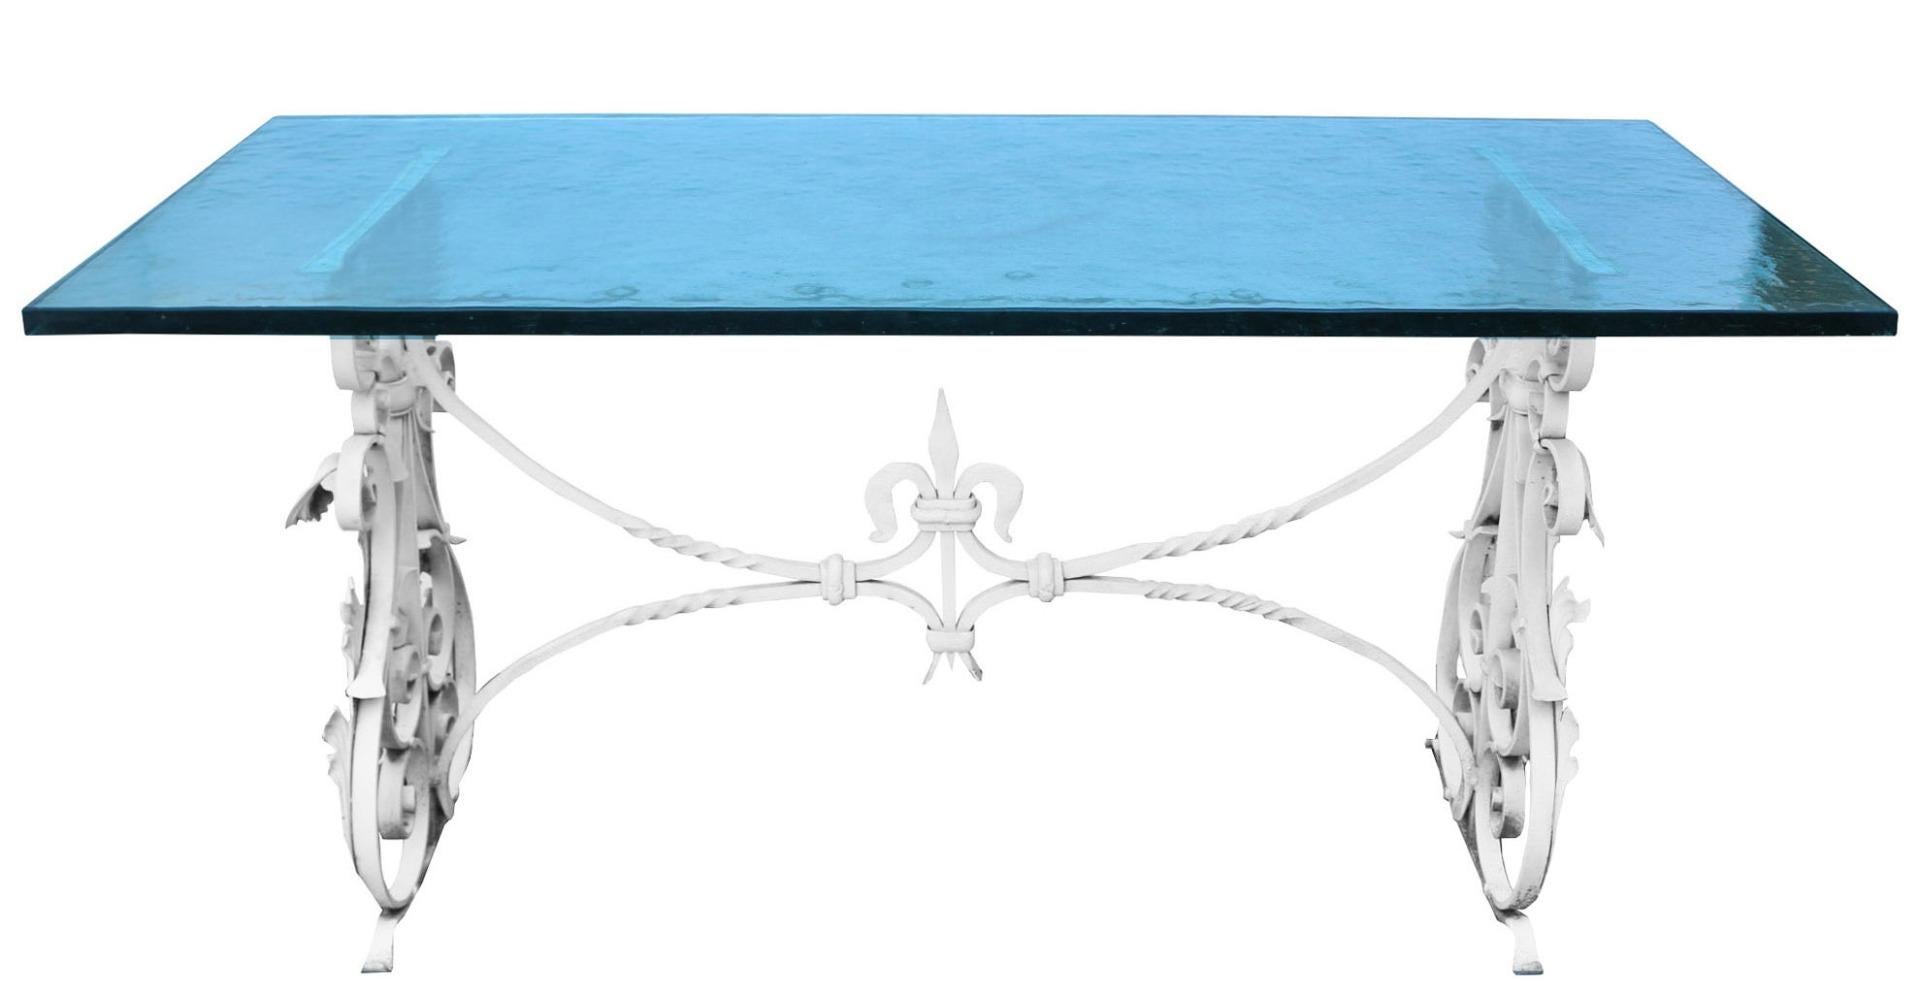 A blacksmith made wrought iron frame with a textured glass table top. The table top and frame come apart for transport.